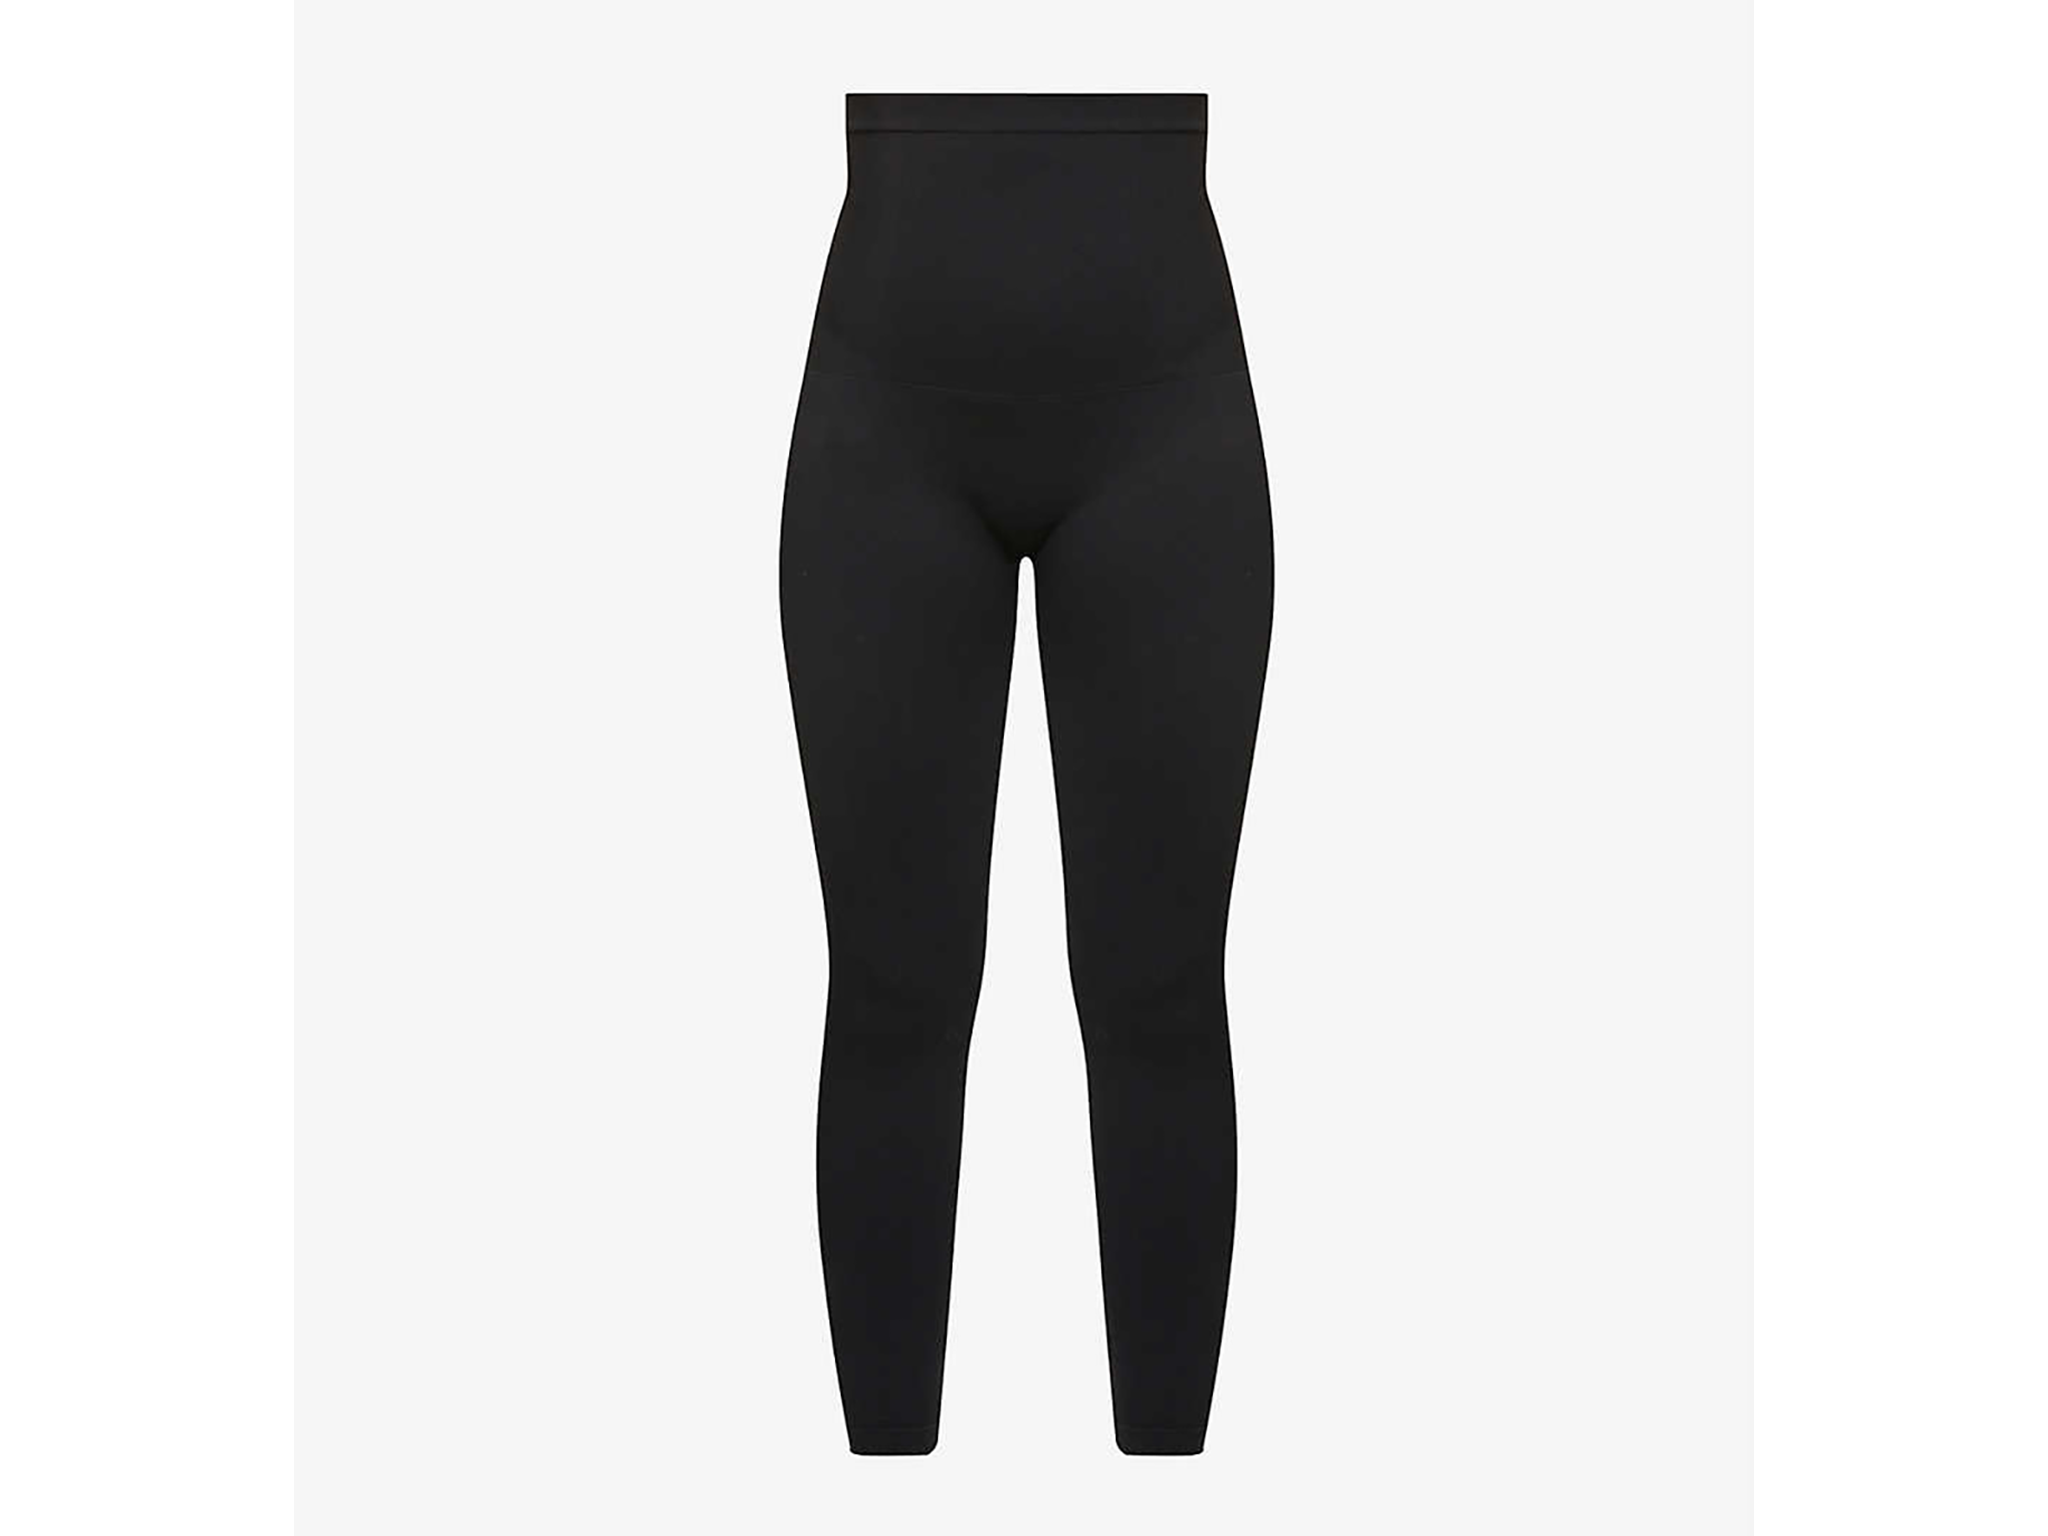 SPANX Look-at-Me Firm Control Cotton Leggings 